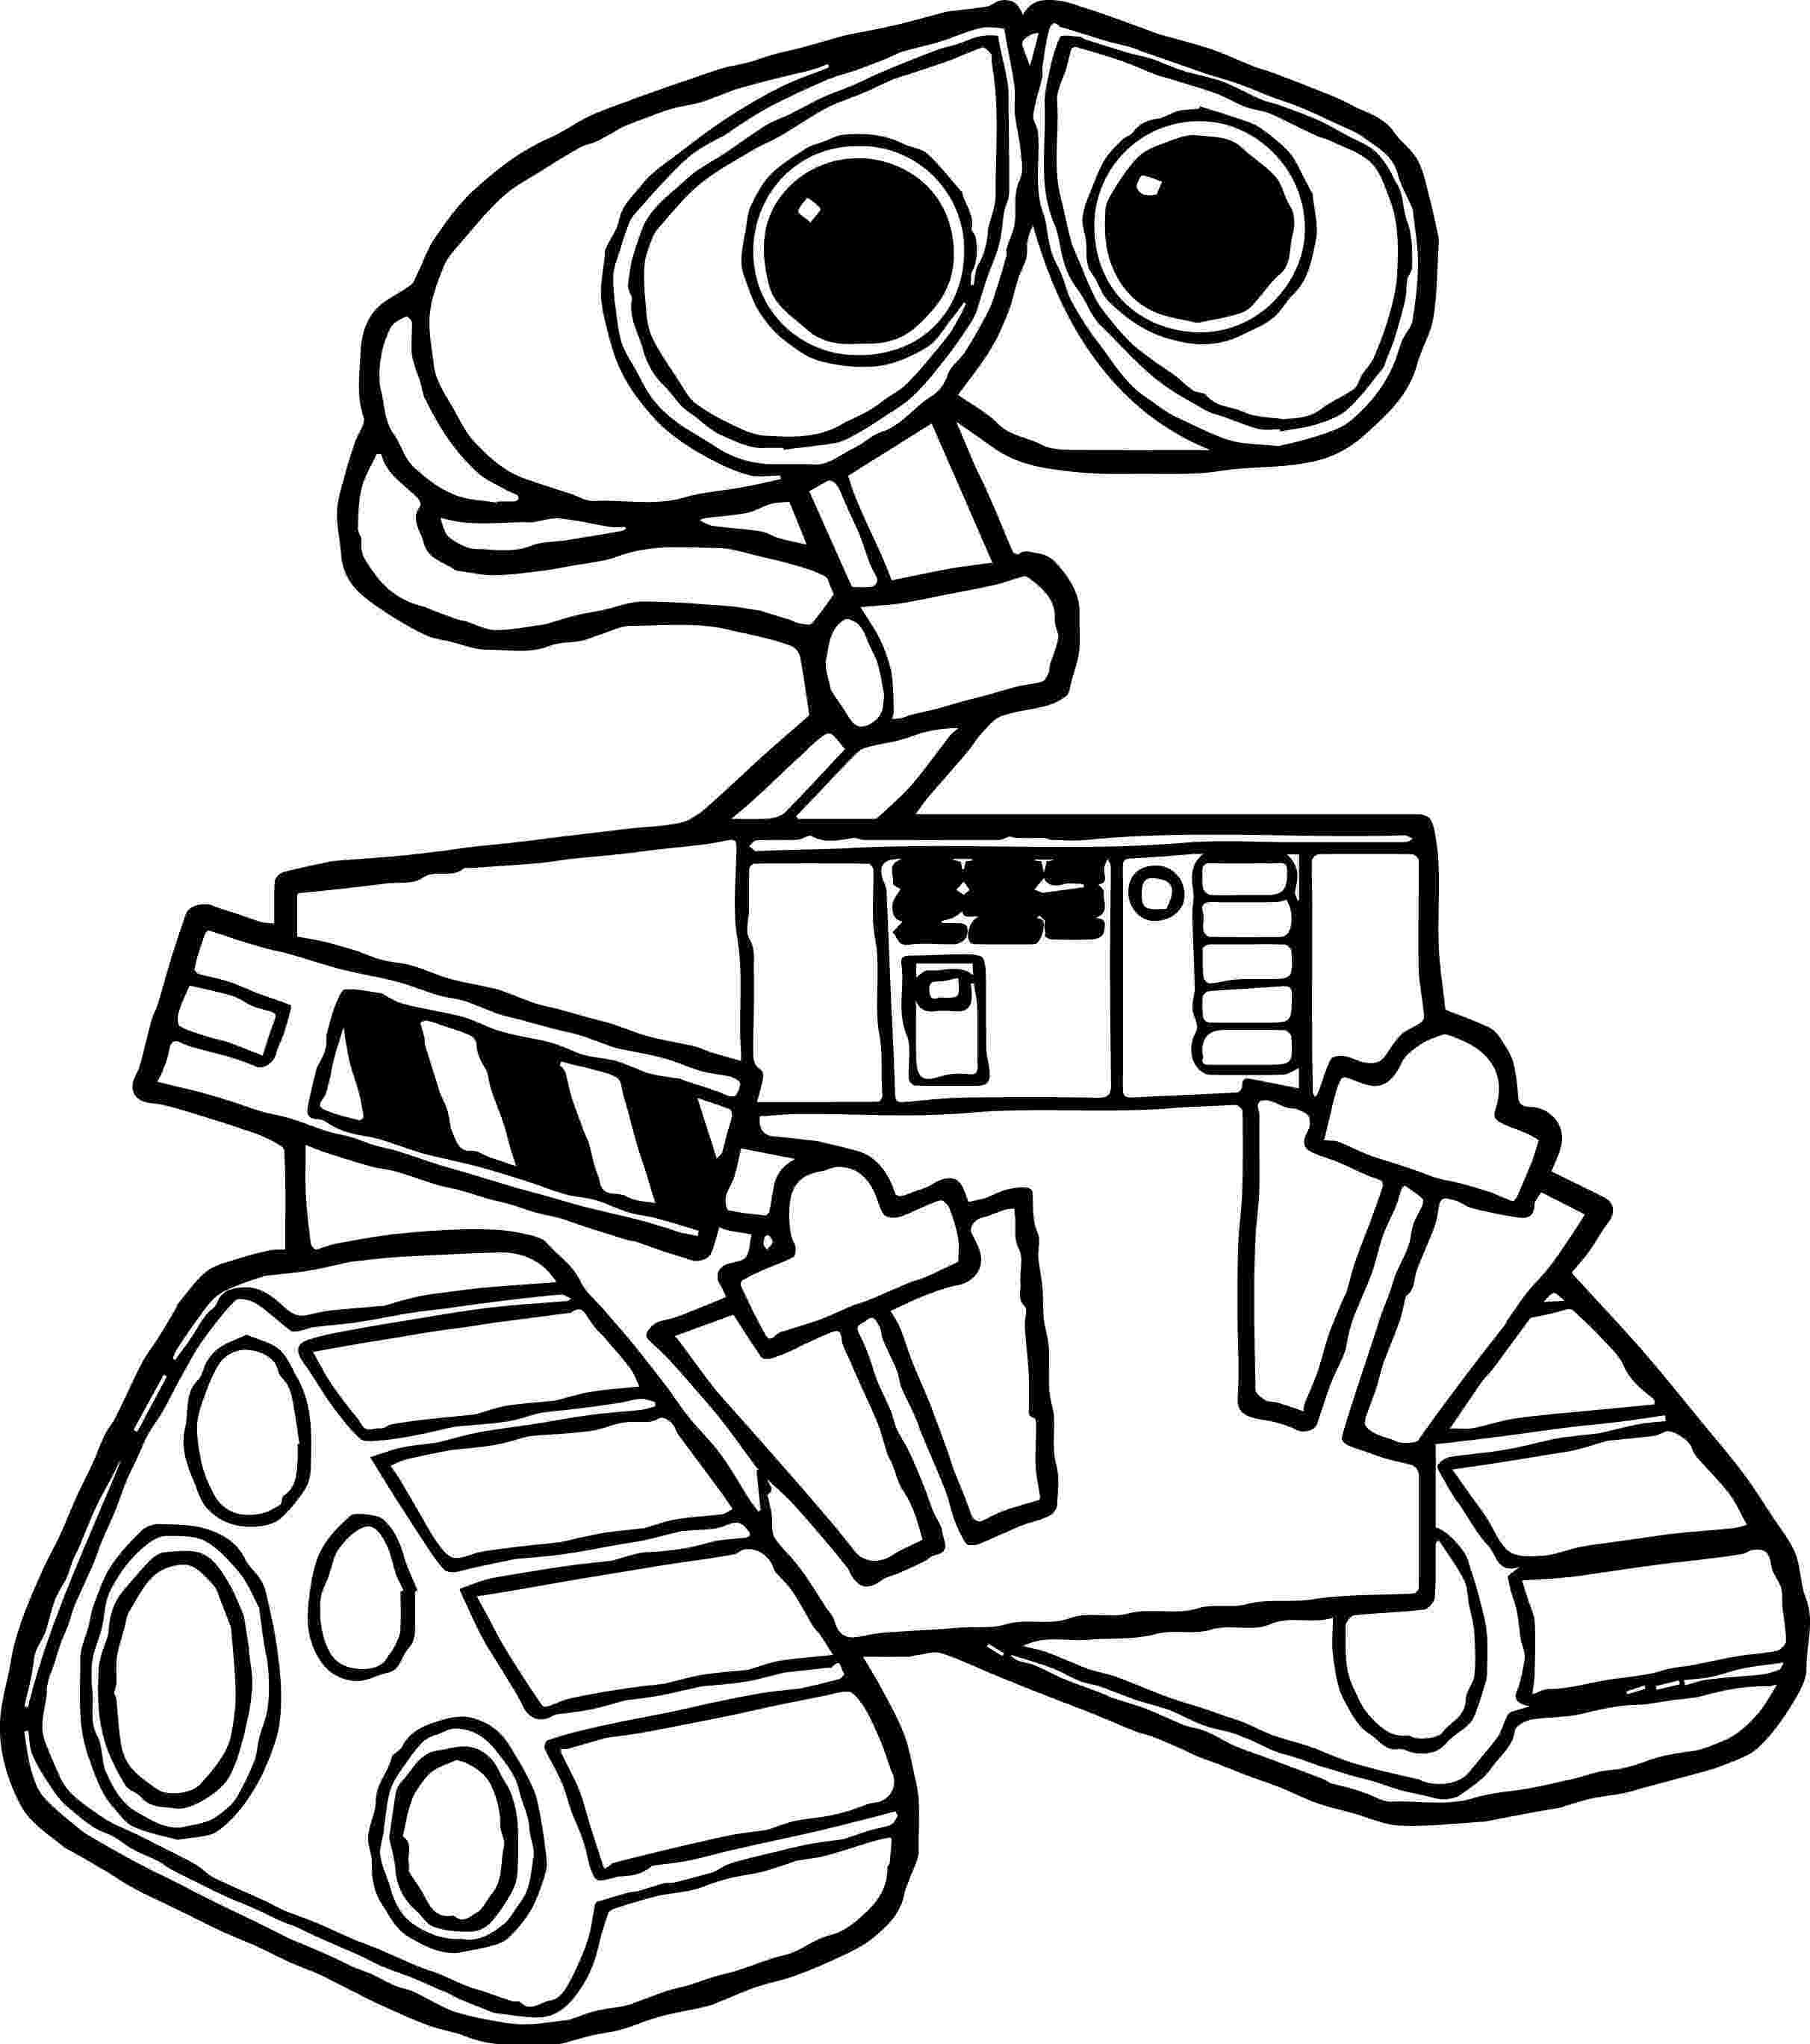 wall e coloring online wall e coloring pages educational fun kids coloring e coloring wall online 